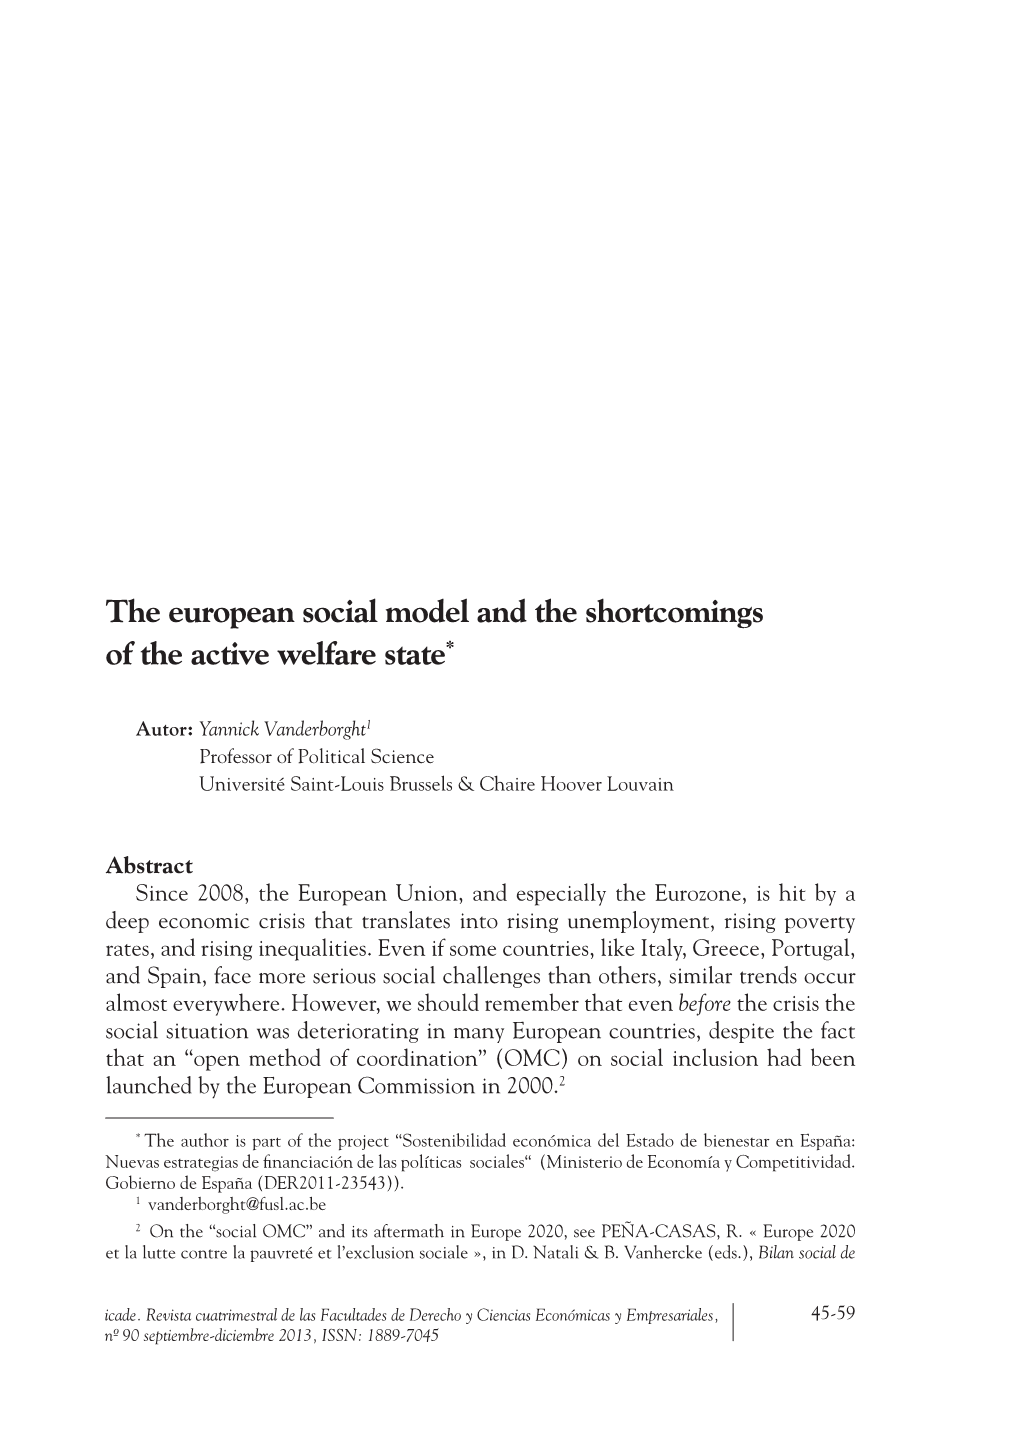 The European Social Model and the Shortcomings of the Active Welfare State*